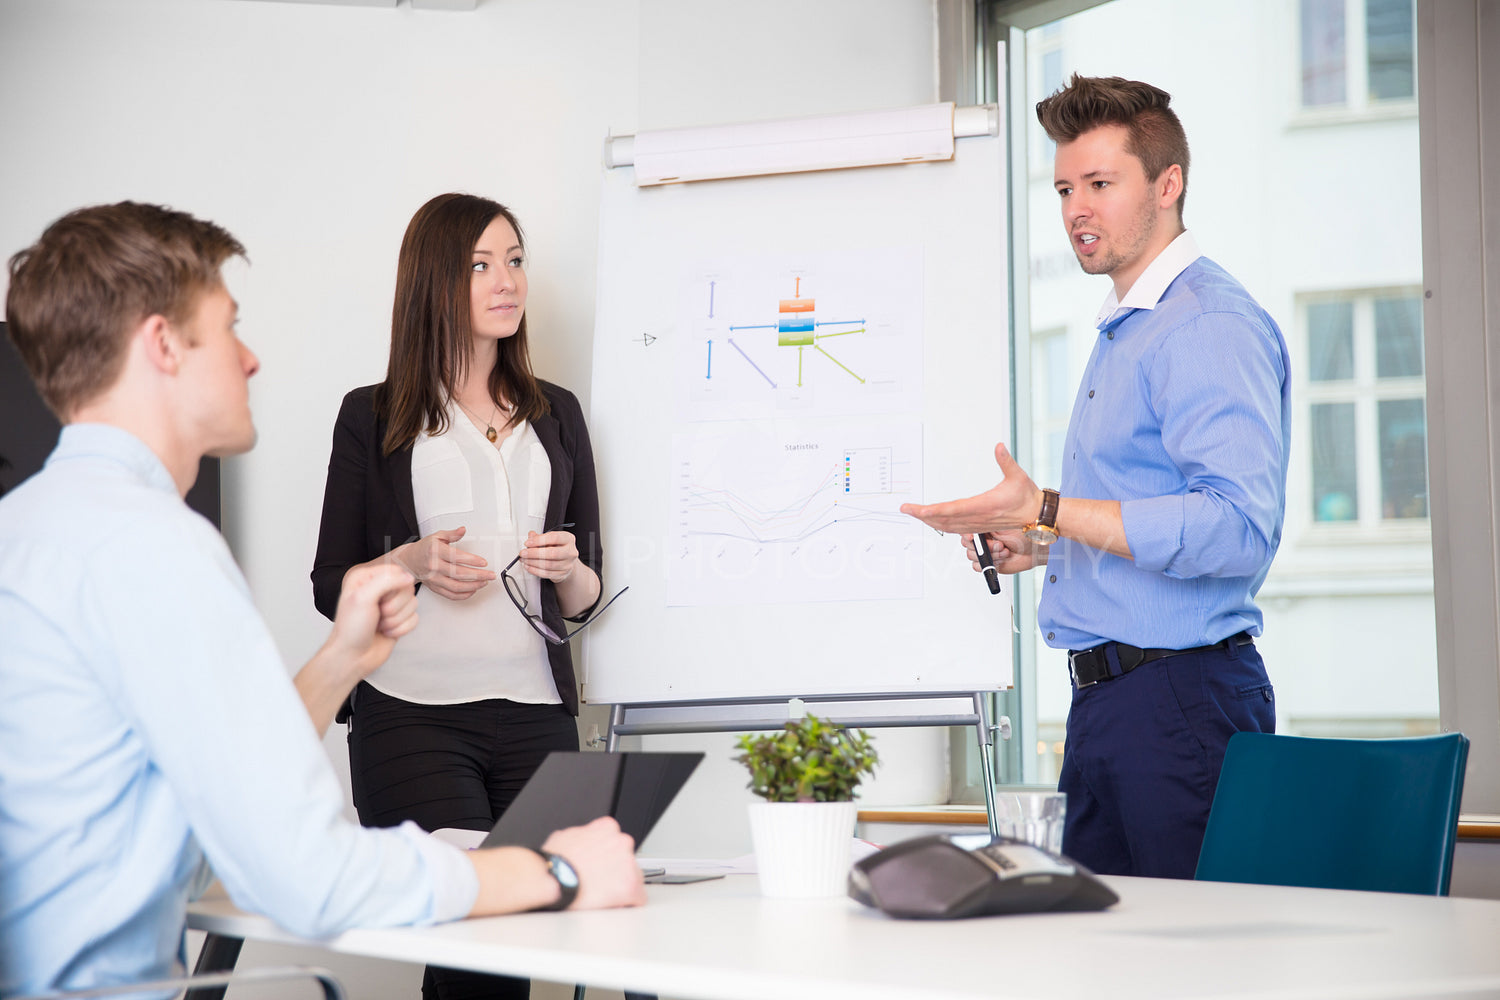 Male Professional Explaining Chart To Coworkers In Office